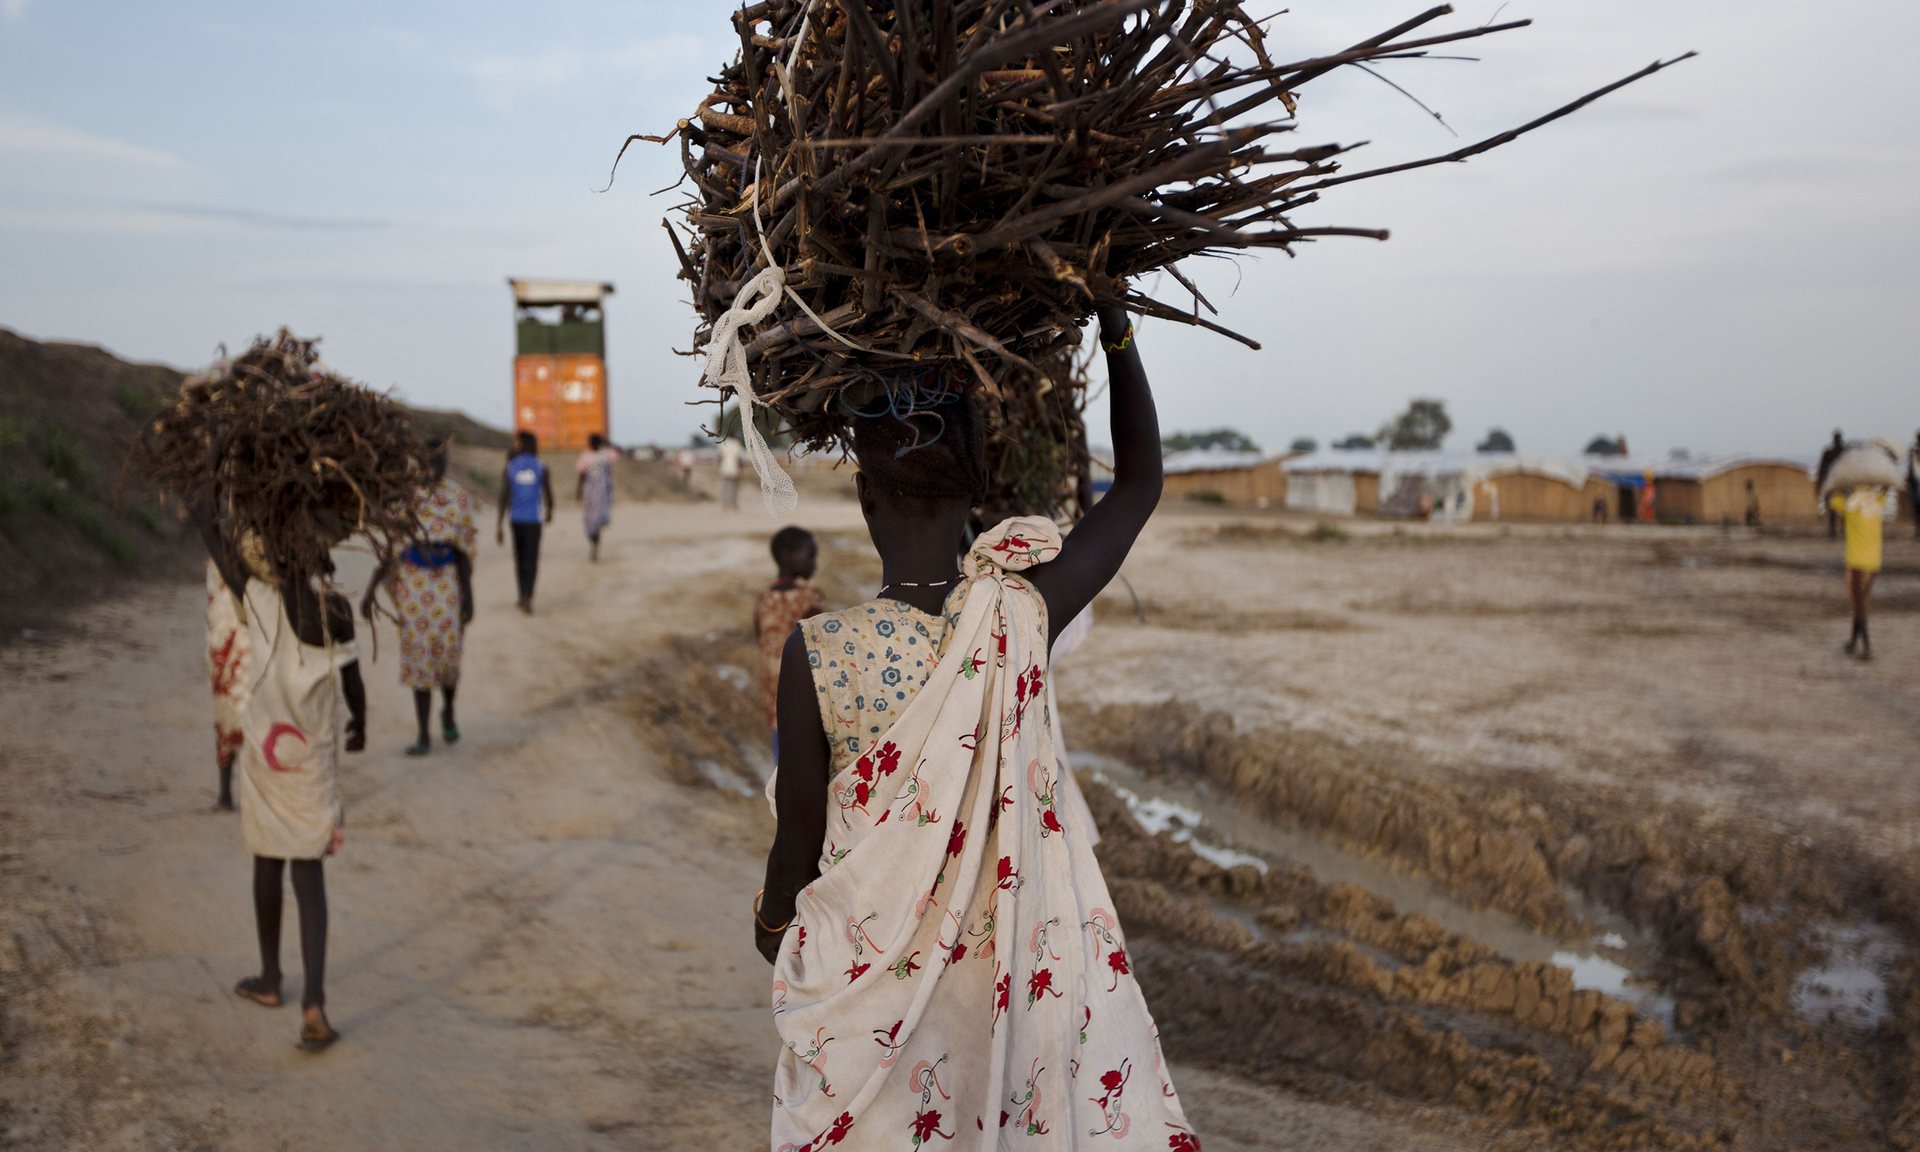 A young woman en route to the UN base outside Bentiu in Unity state, South Sudan, after collecting firewood. Such expeditions leave women and girls vulnerable to attack. Photograph: Tristan Mcconnell/AFP/Getty Images